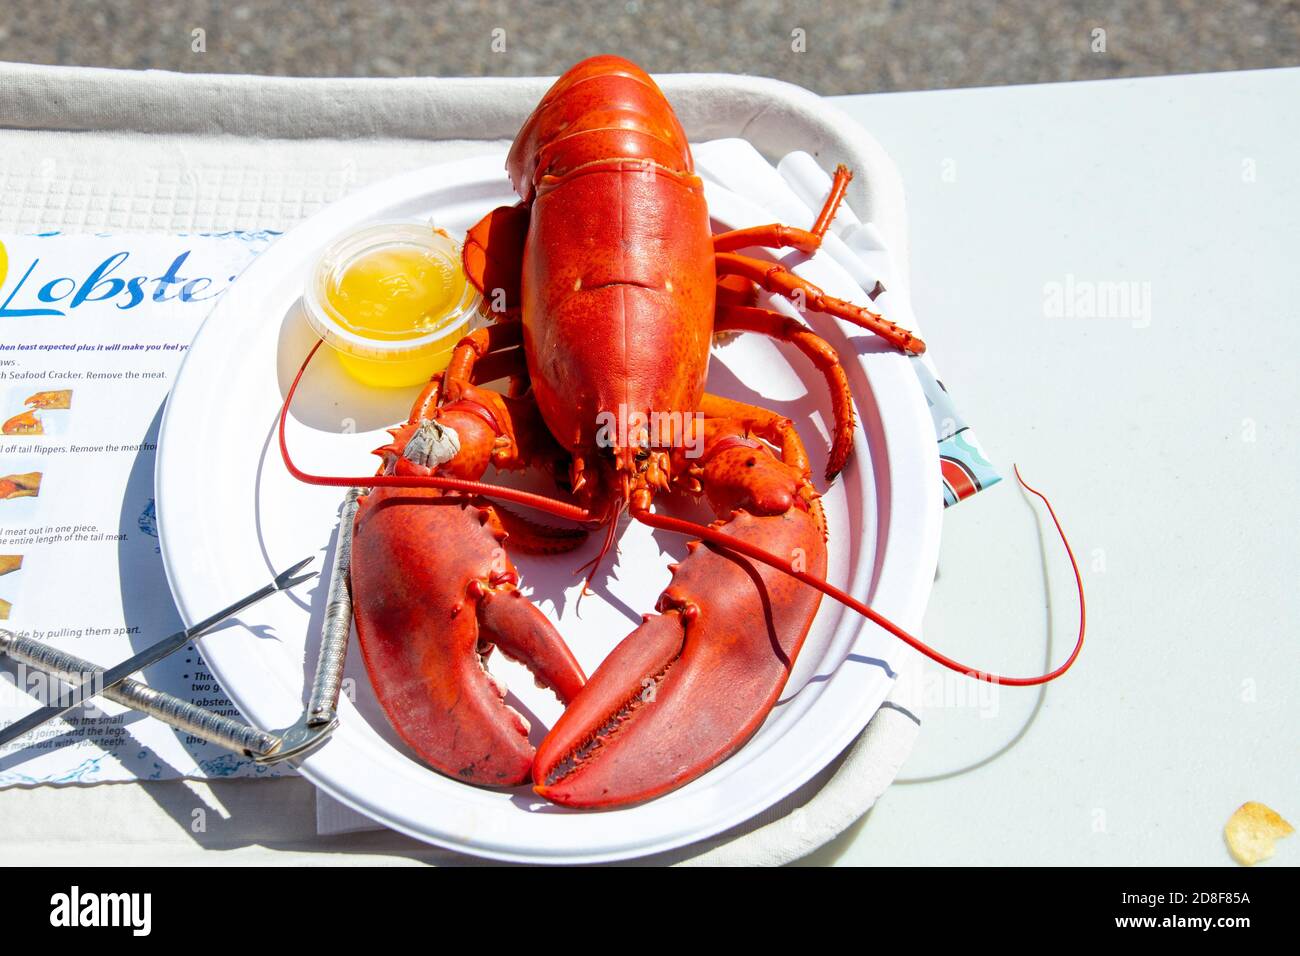 Whole Lobster Quoddy Bay Lobster Restaurant, Eastport, Maine, USA Foto Stock